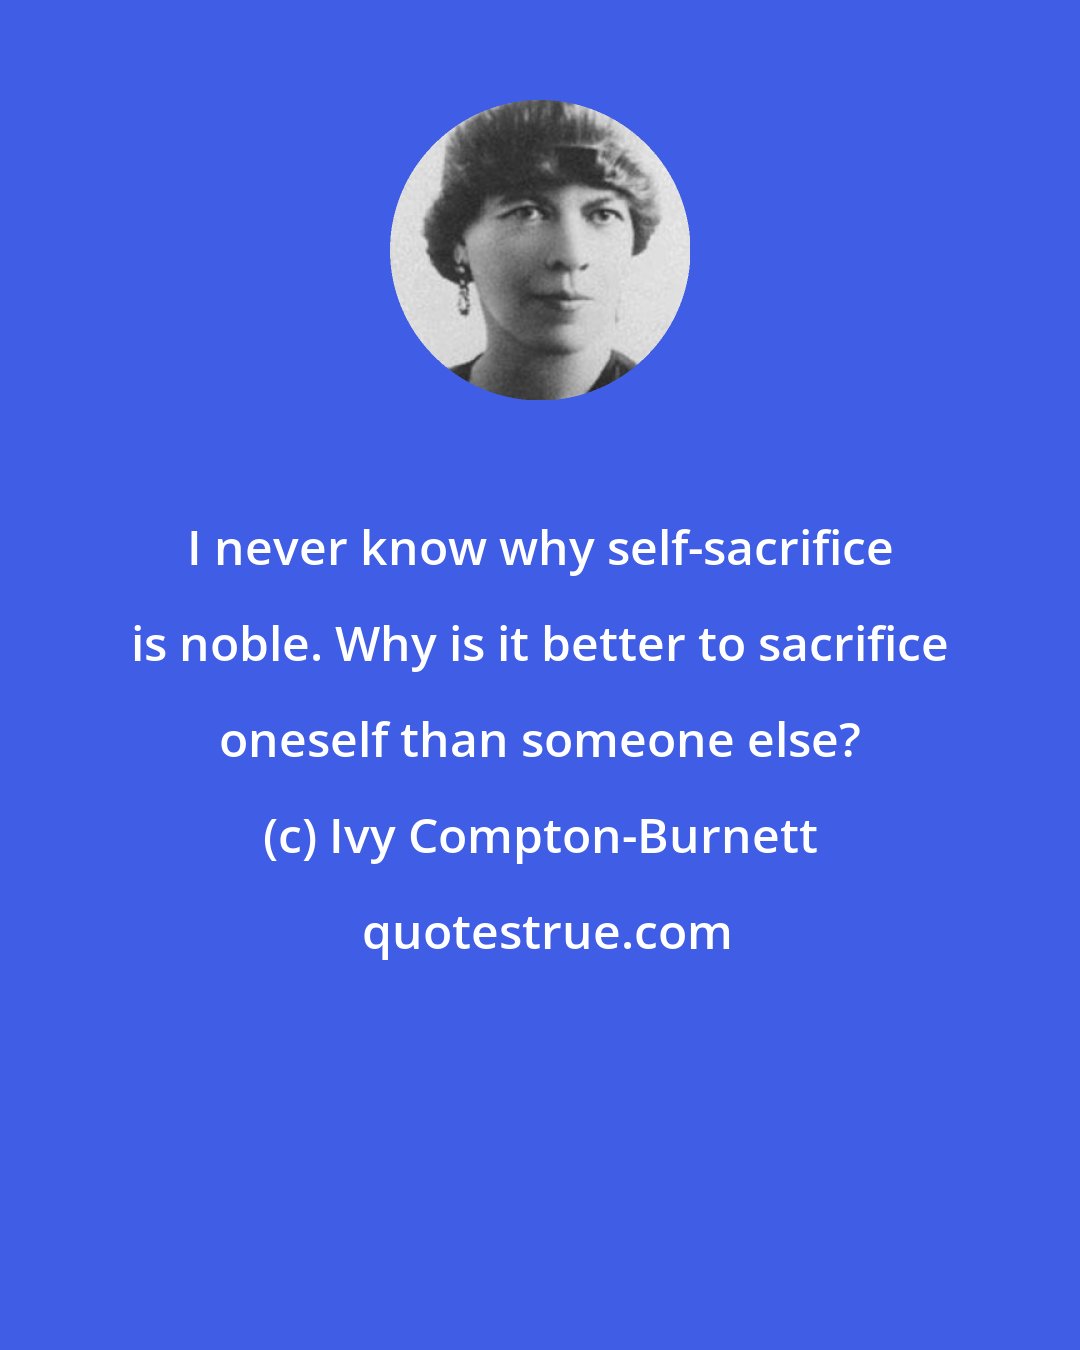 Ivy Compton-Burnett: I never know why self-sacrifice is noble. Why is it better to sacrifice oneself than someone else?